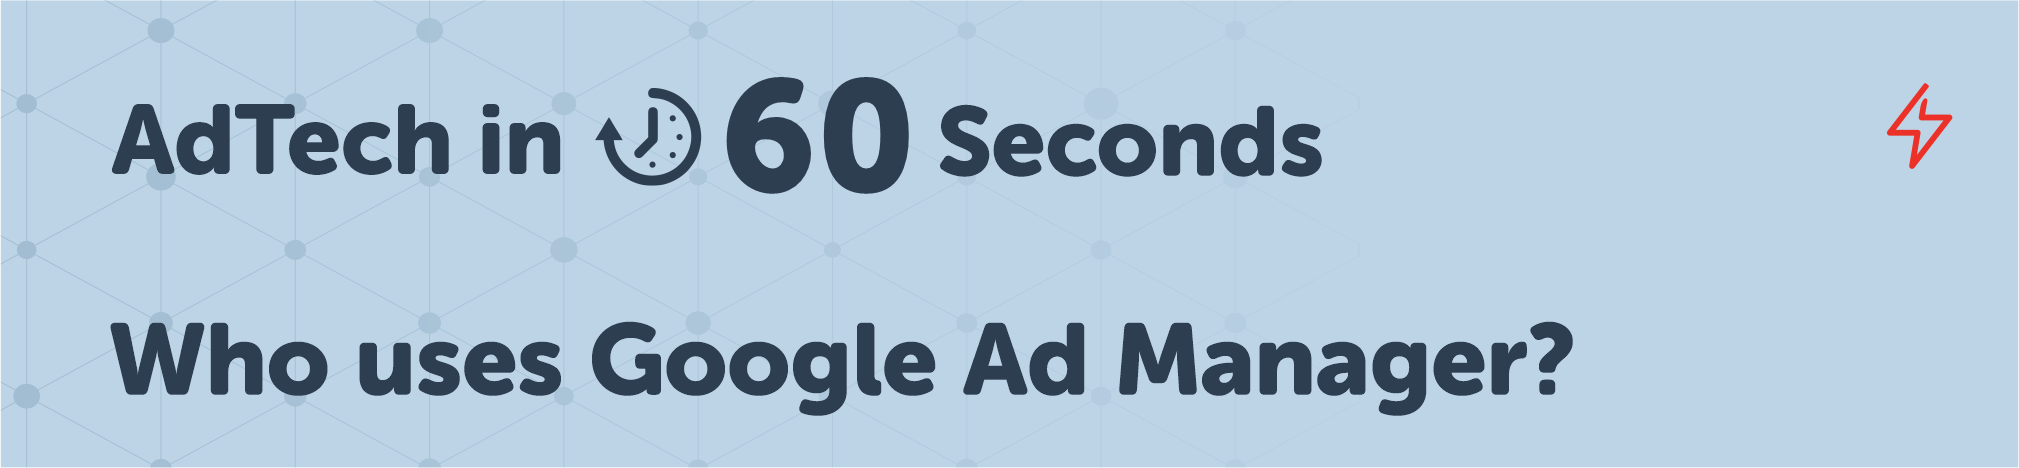 Who uses Google Ad Manager?